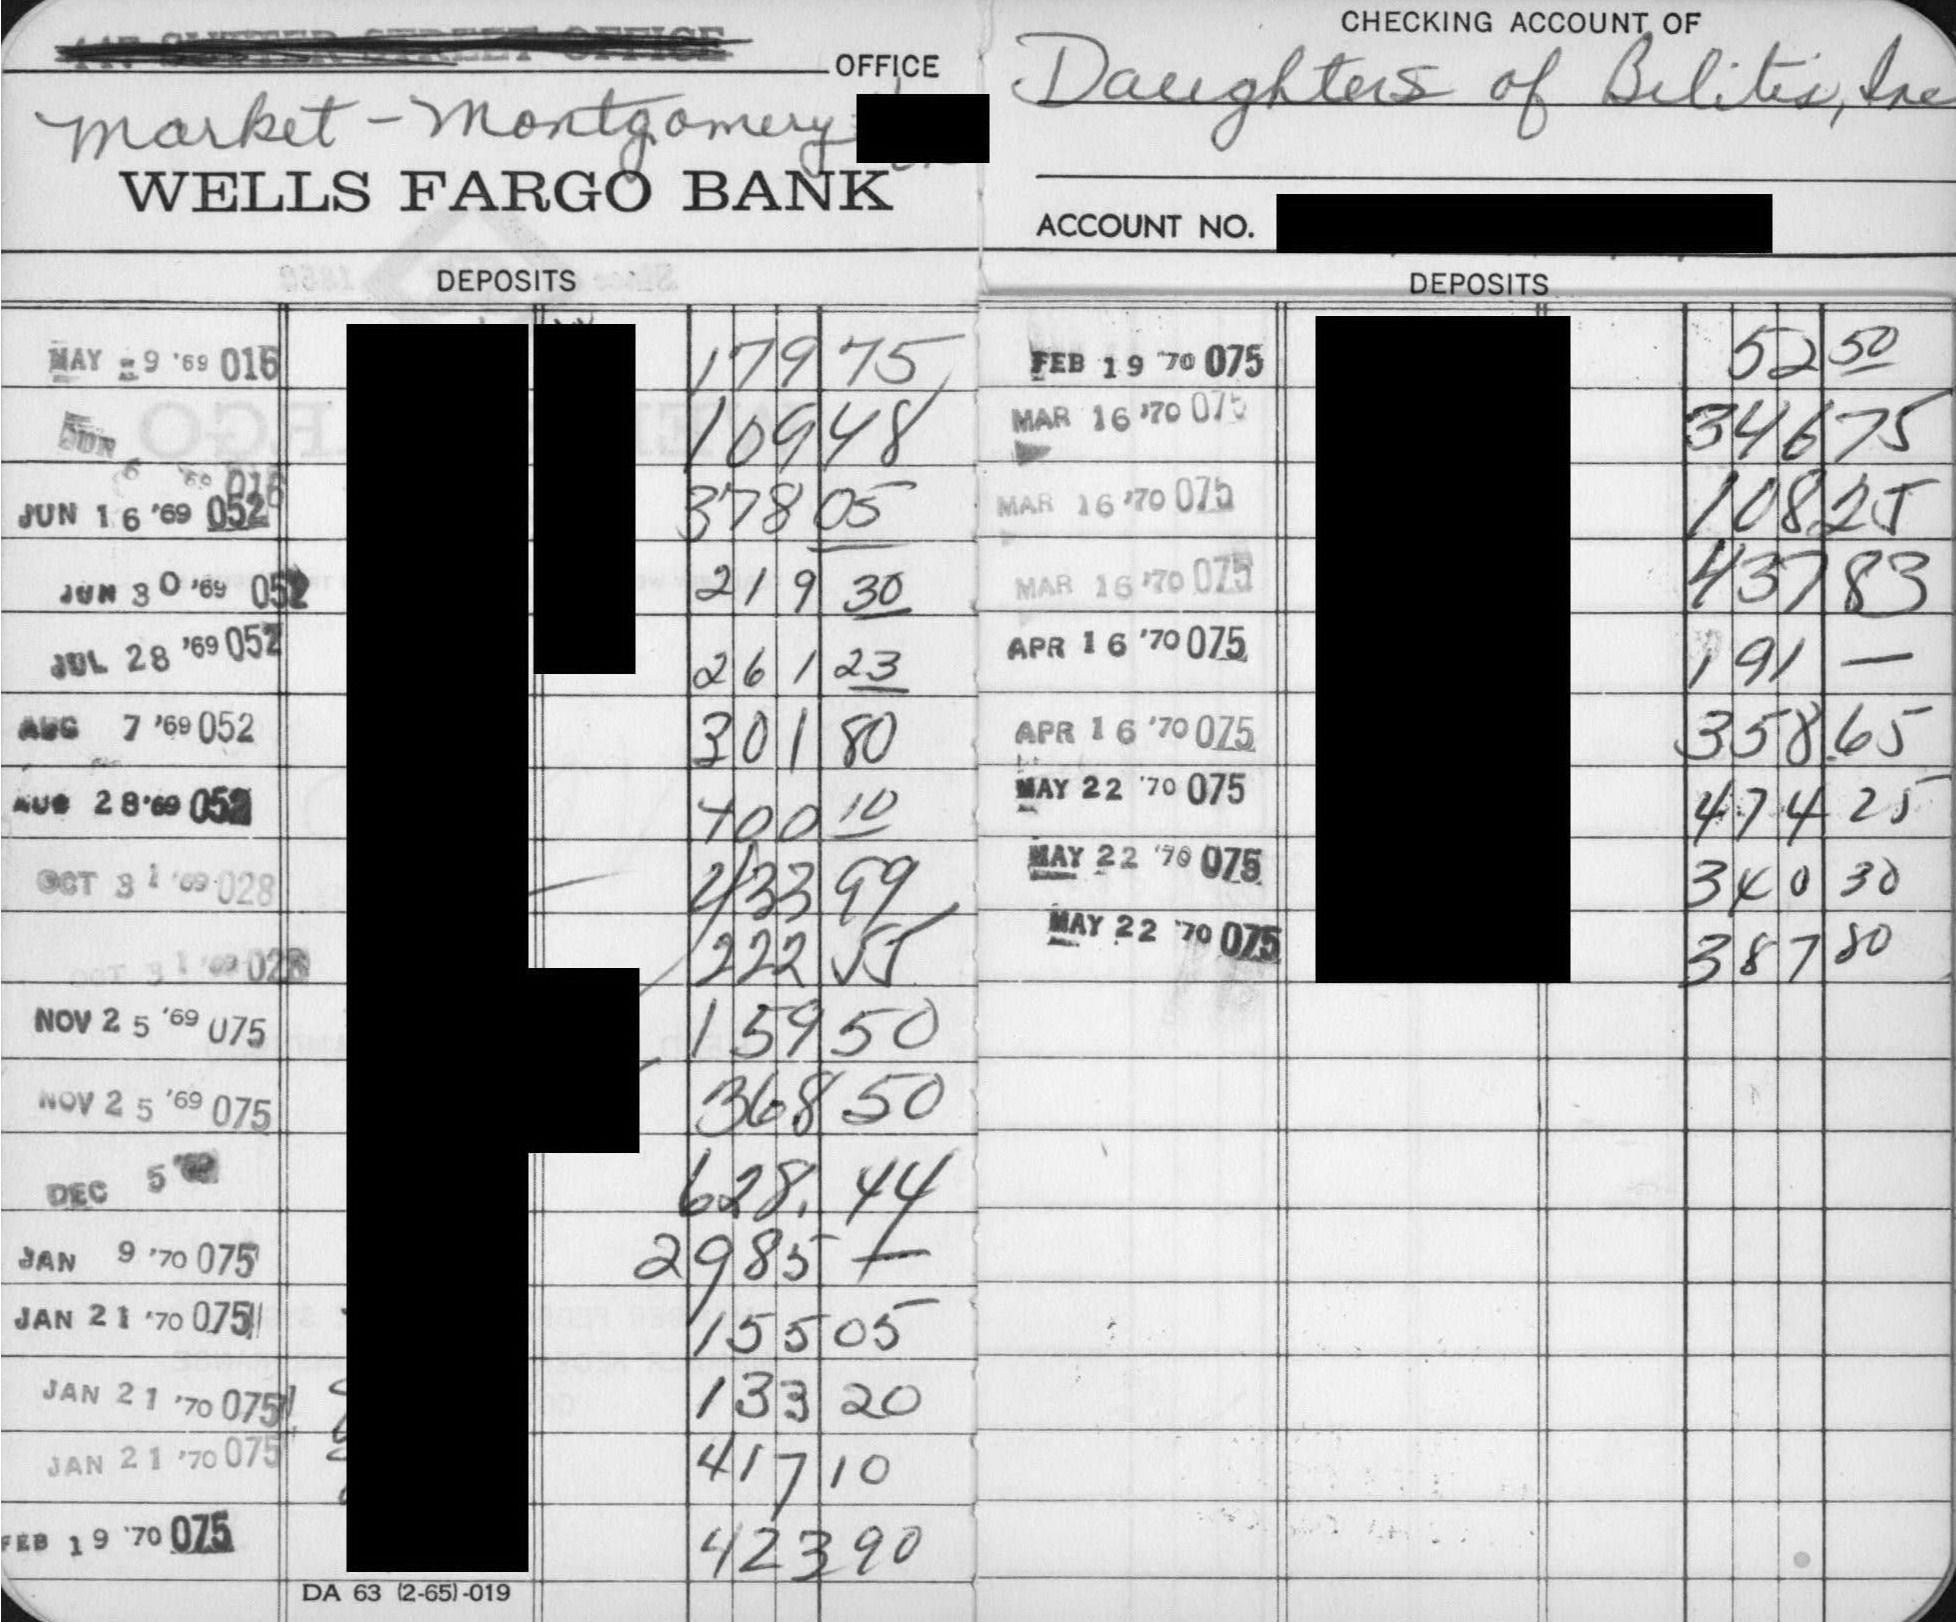 Account book with multiple page entries, many blacked out. At the top it reads: Daughters of Bilitis-Market-Montgomery-Wells Fargo Bank. Image link will enlarge image.